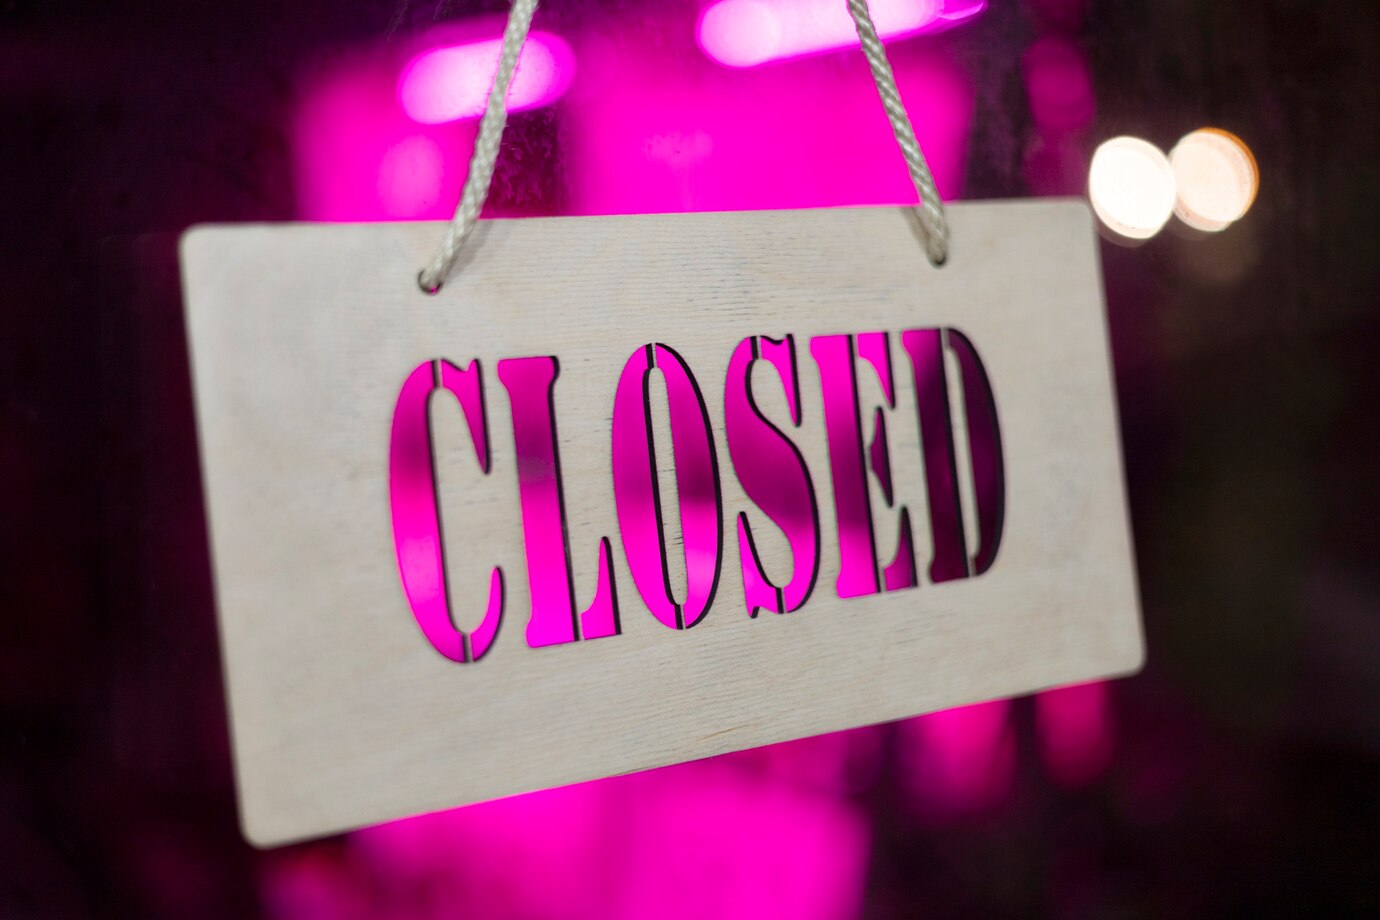 closed sign with bright purple light 23 2149169038